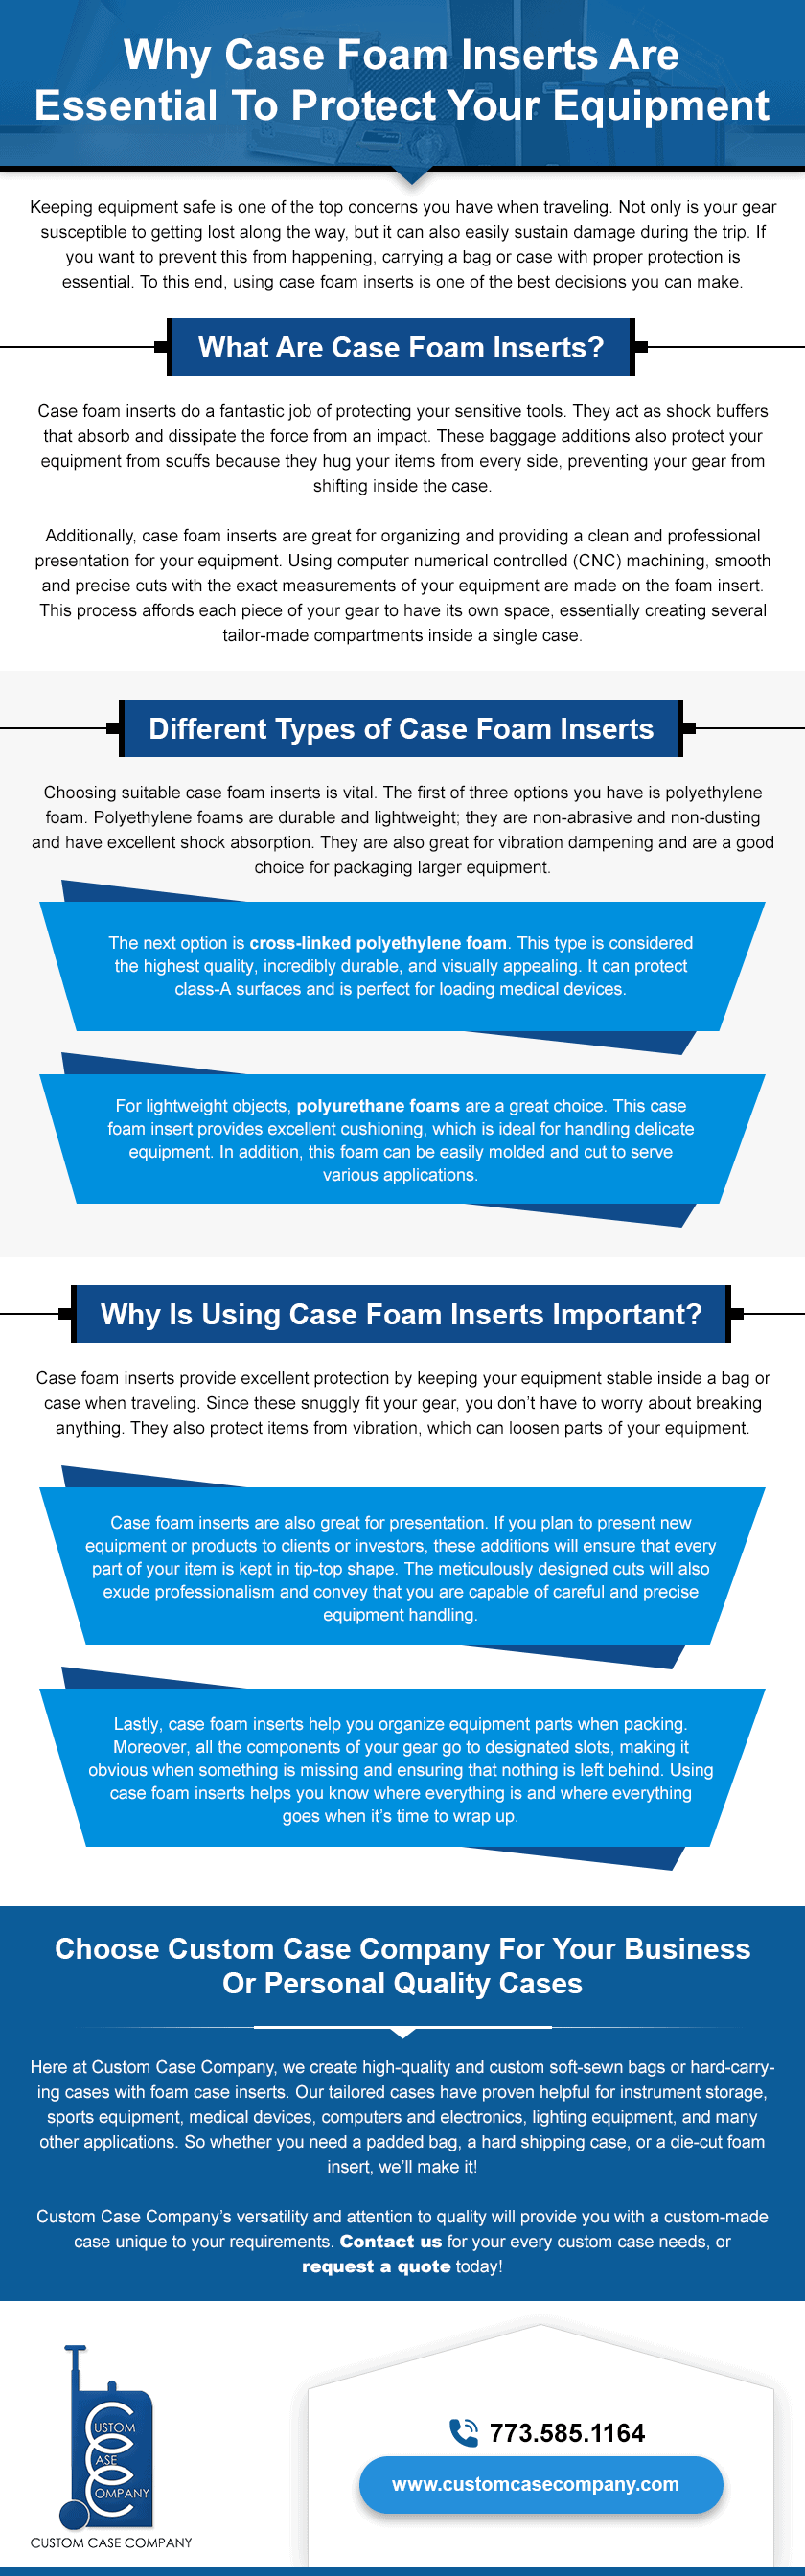 Why-Case-Foam-Inserts-Are-Essential-To-Protect-Your-Equipment” data-lazy-src=